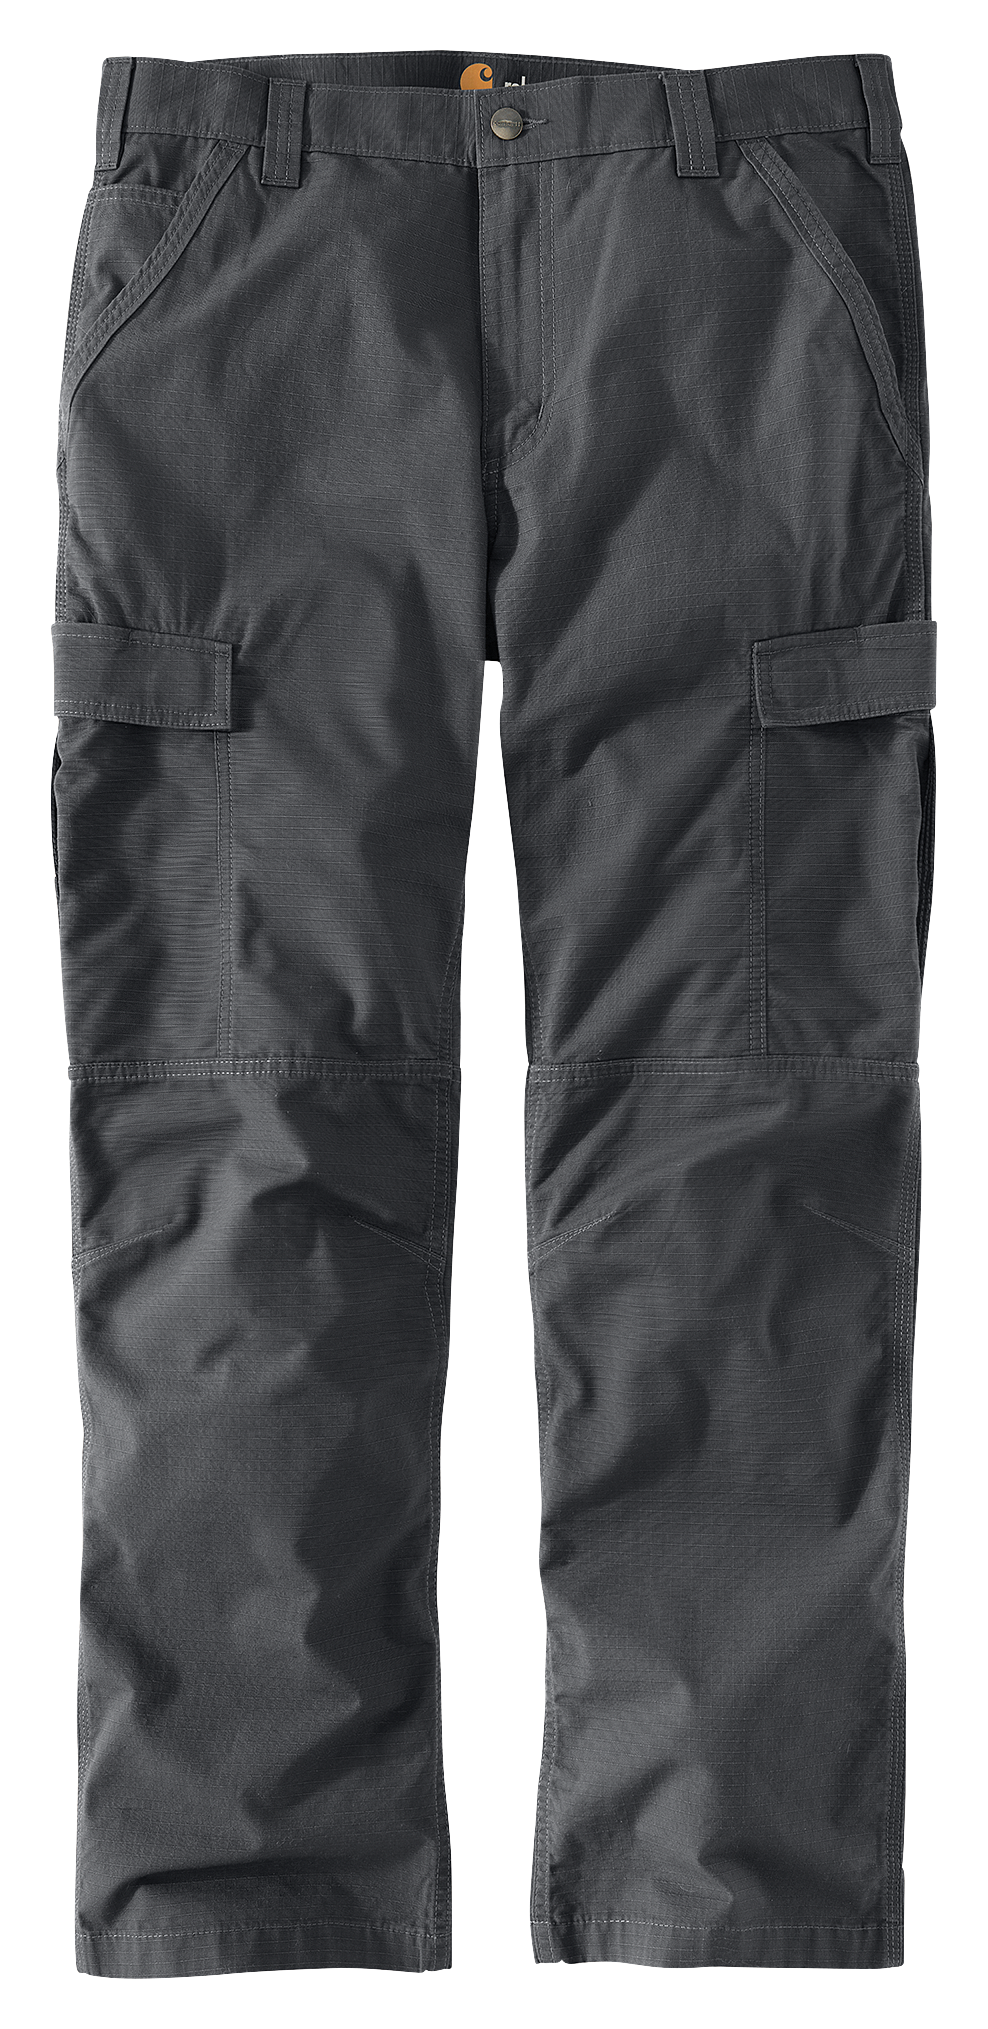 Carhartt Force Relaxed Fit Ripstop Utility Pant